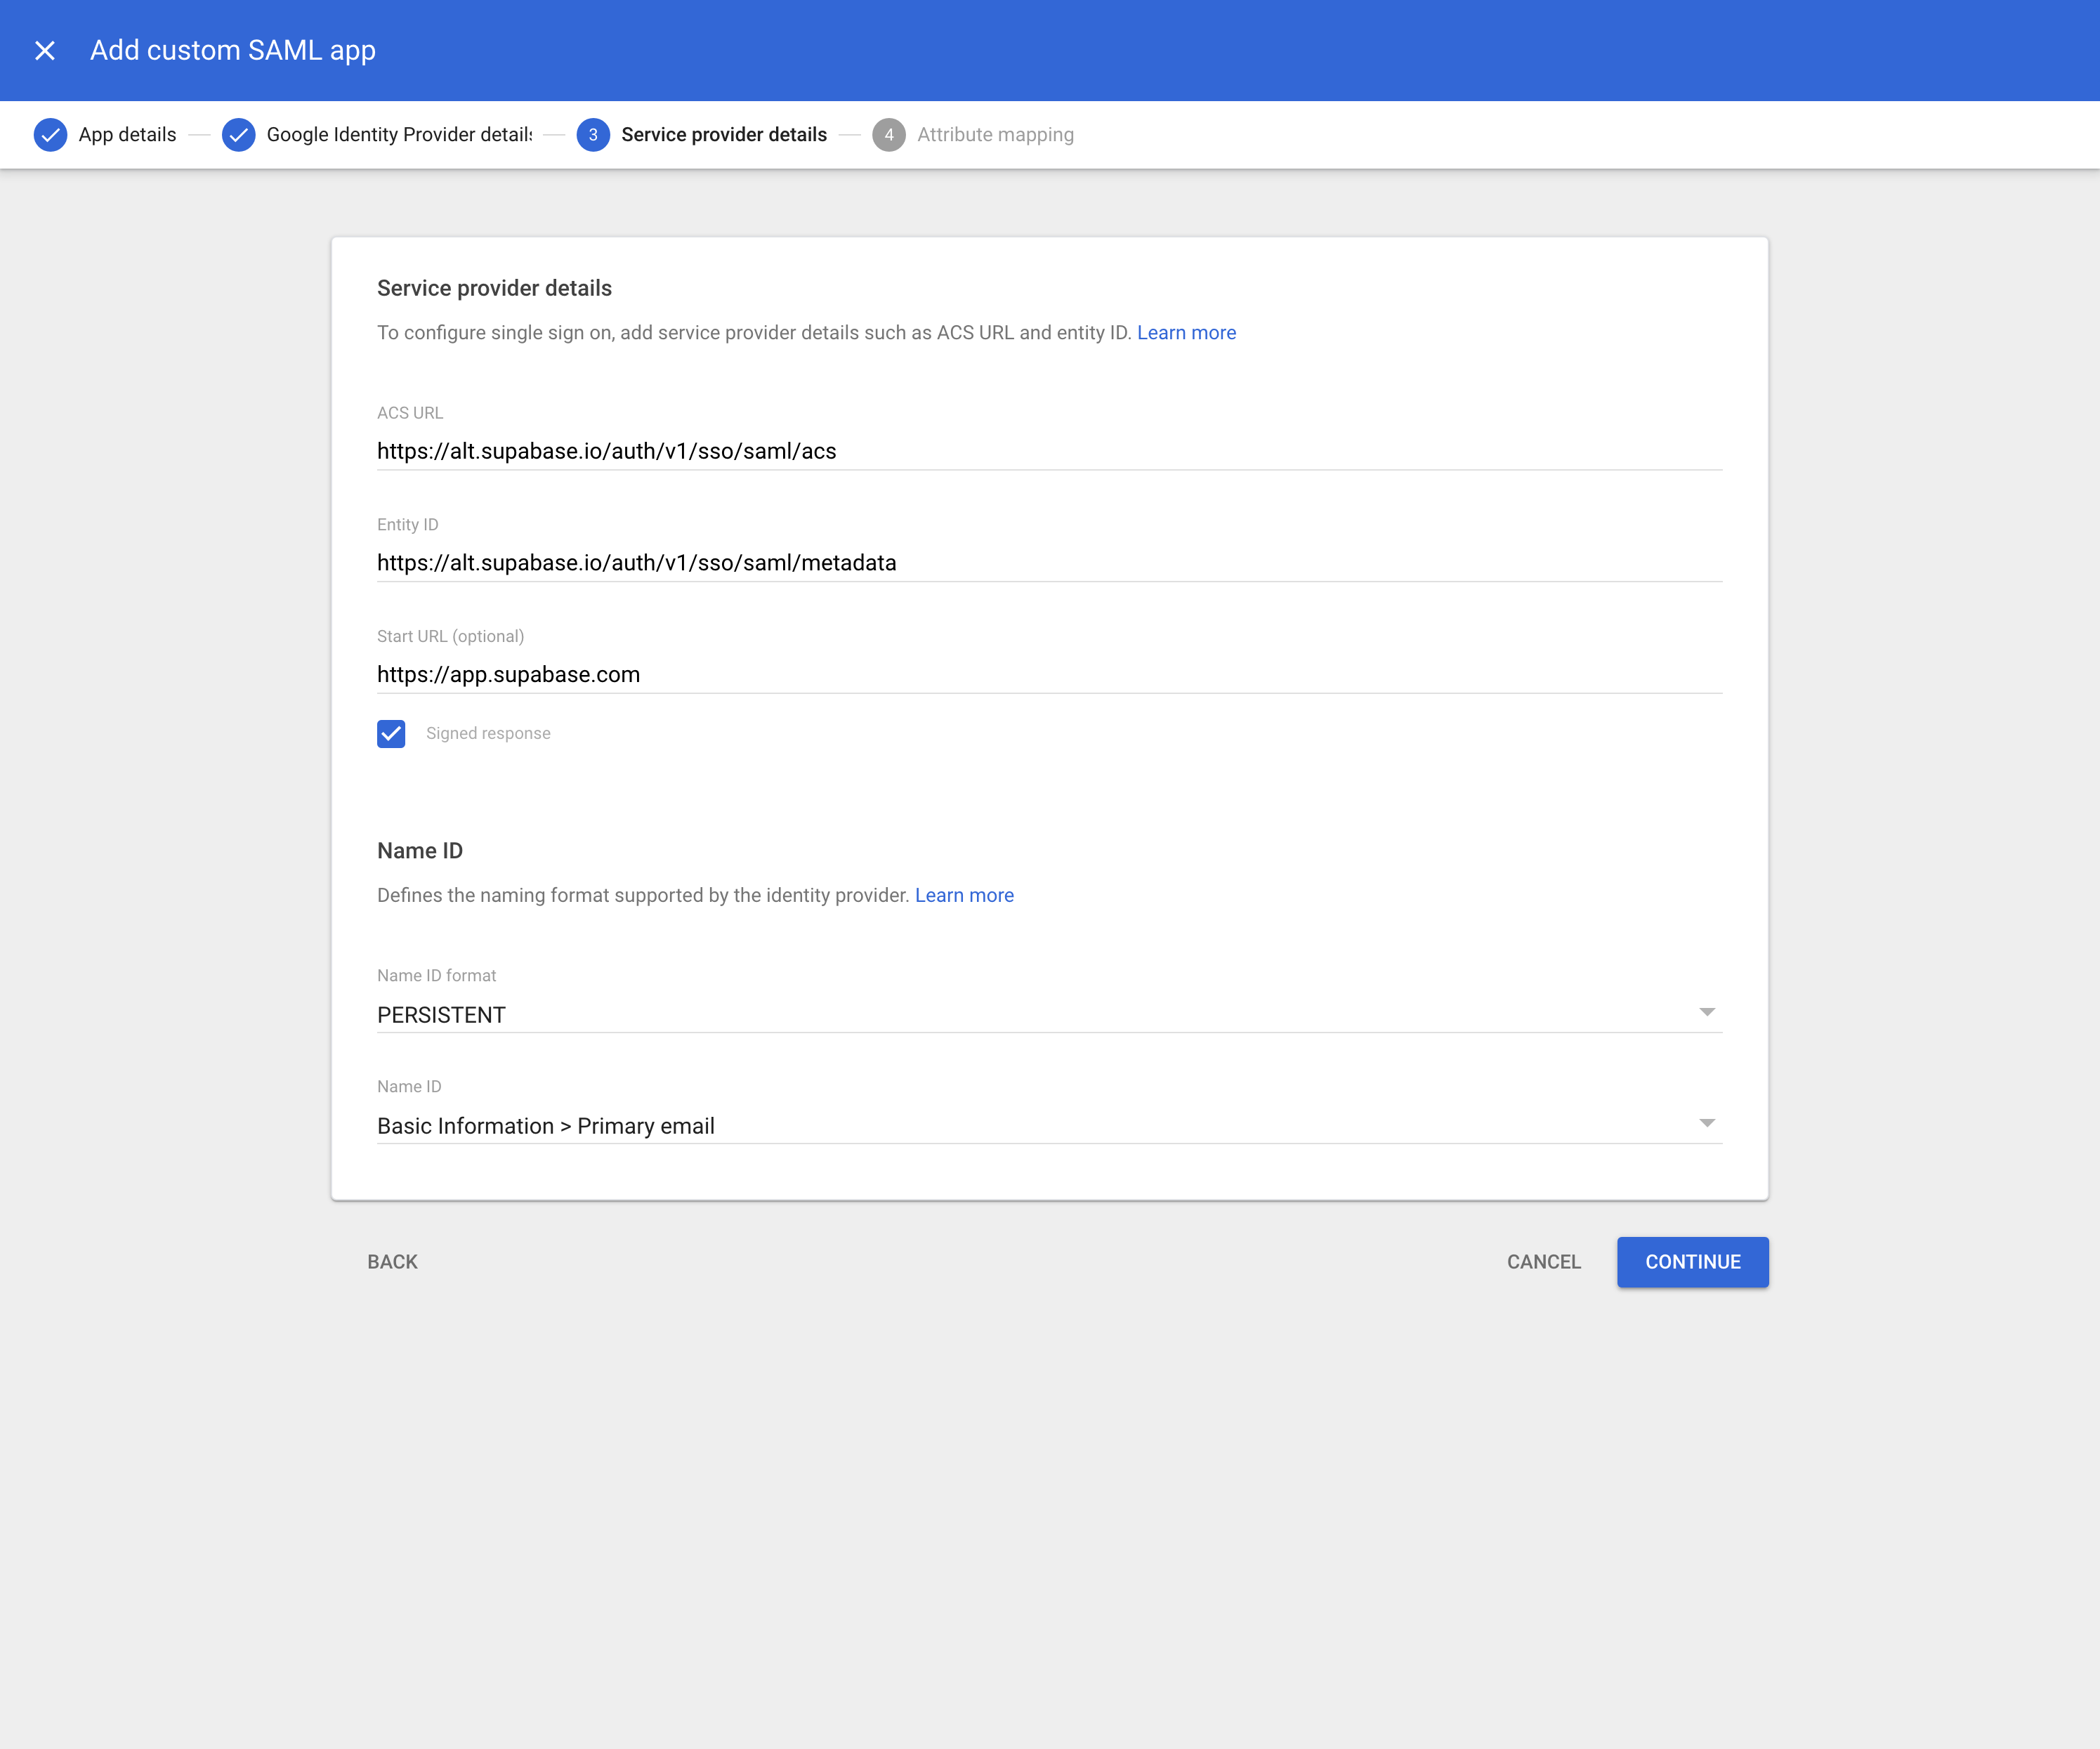 Google Workspace: Web and mobile apps admin console, Add custom SAML,
Service provider details screen